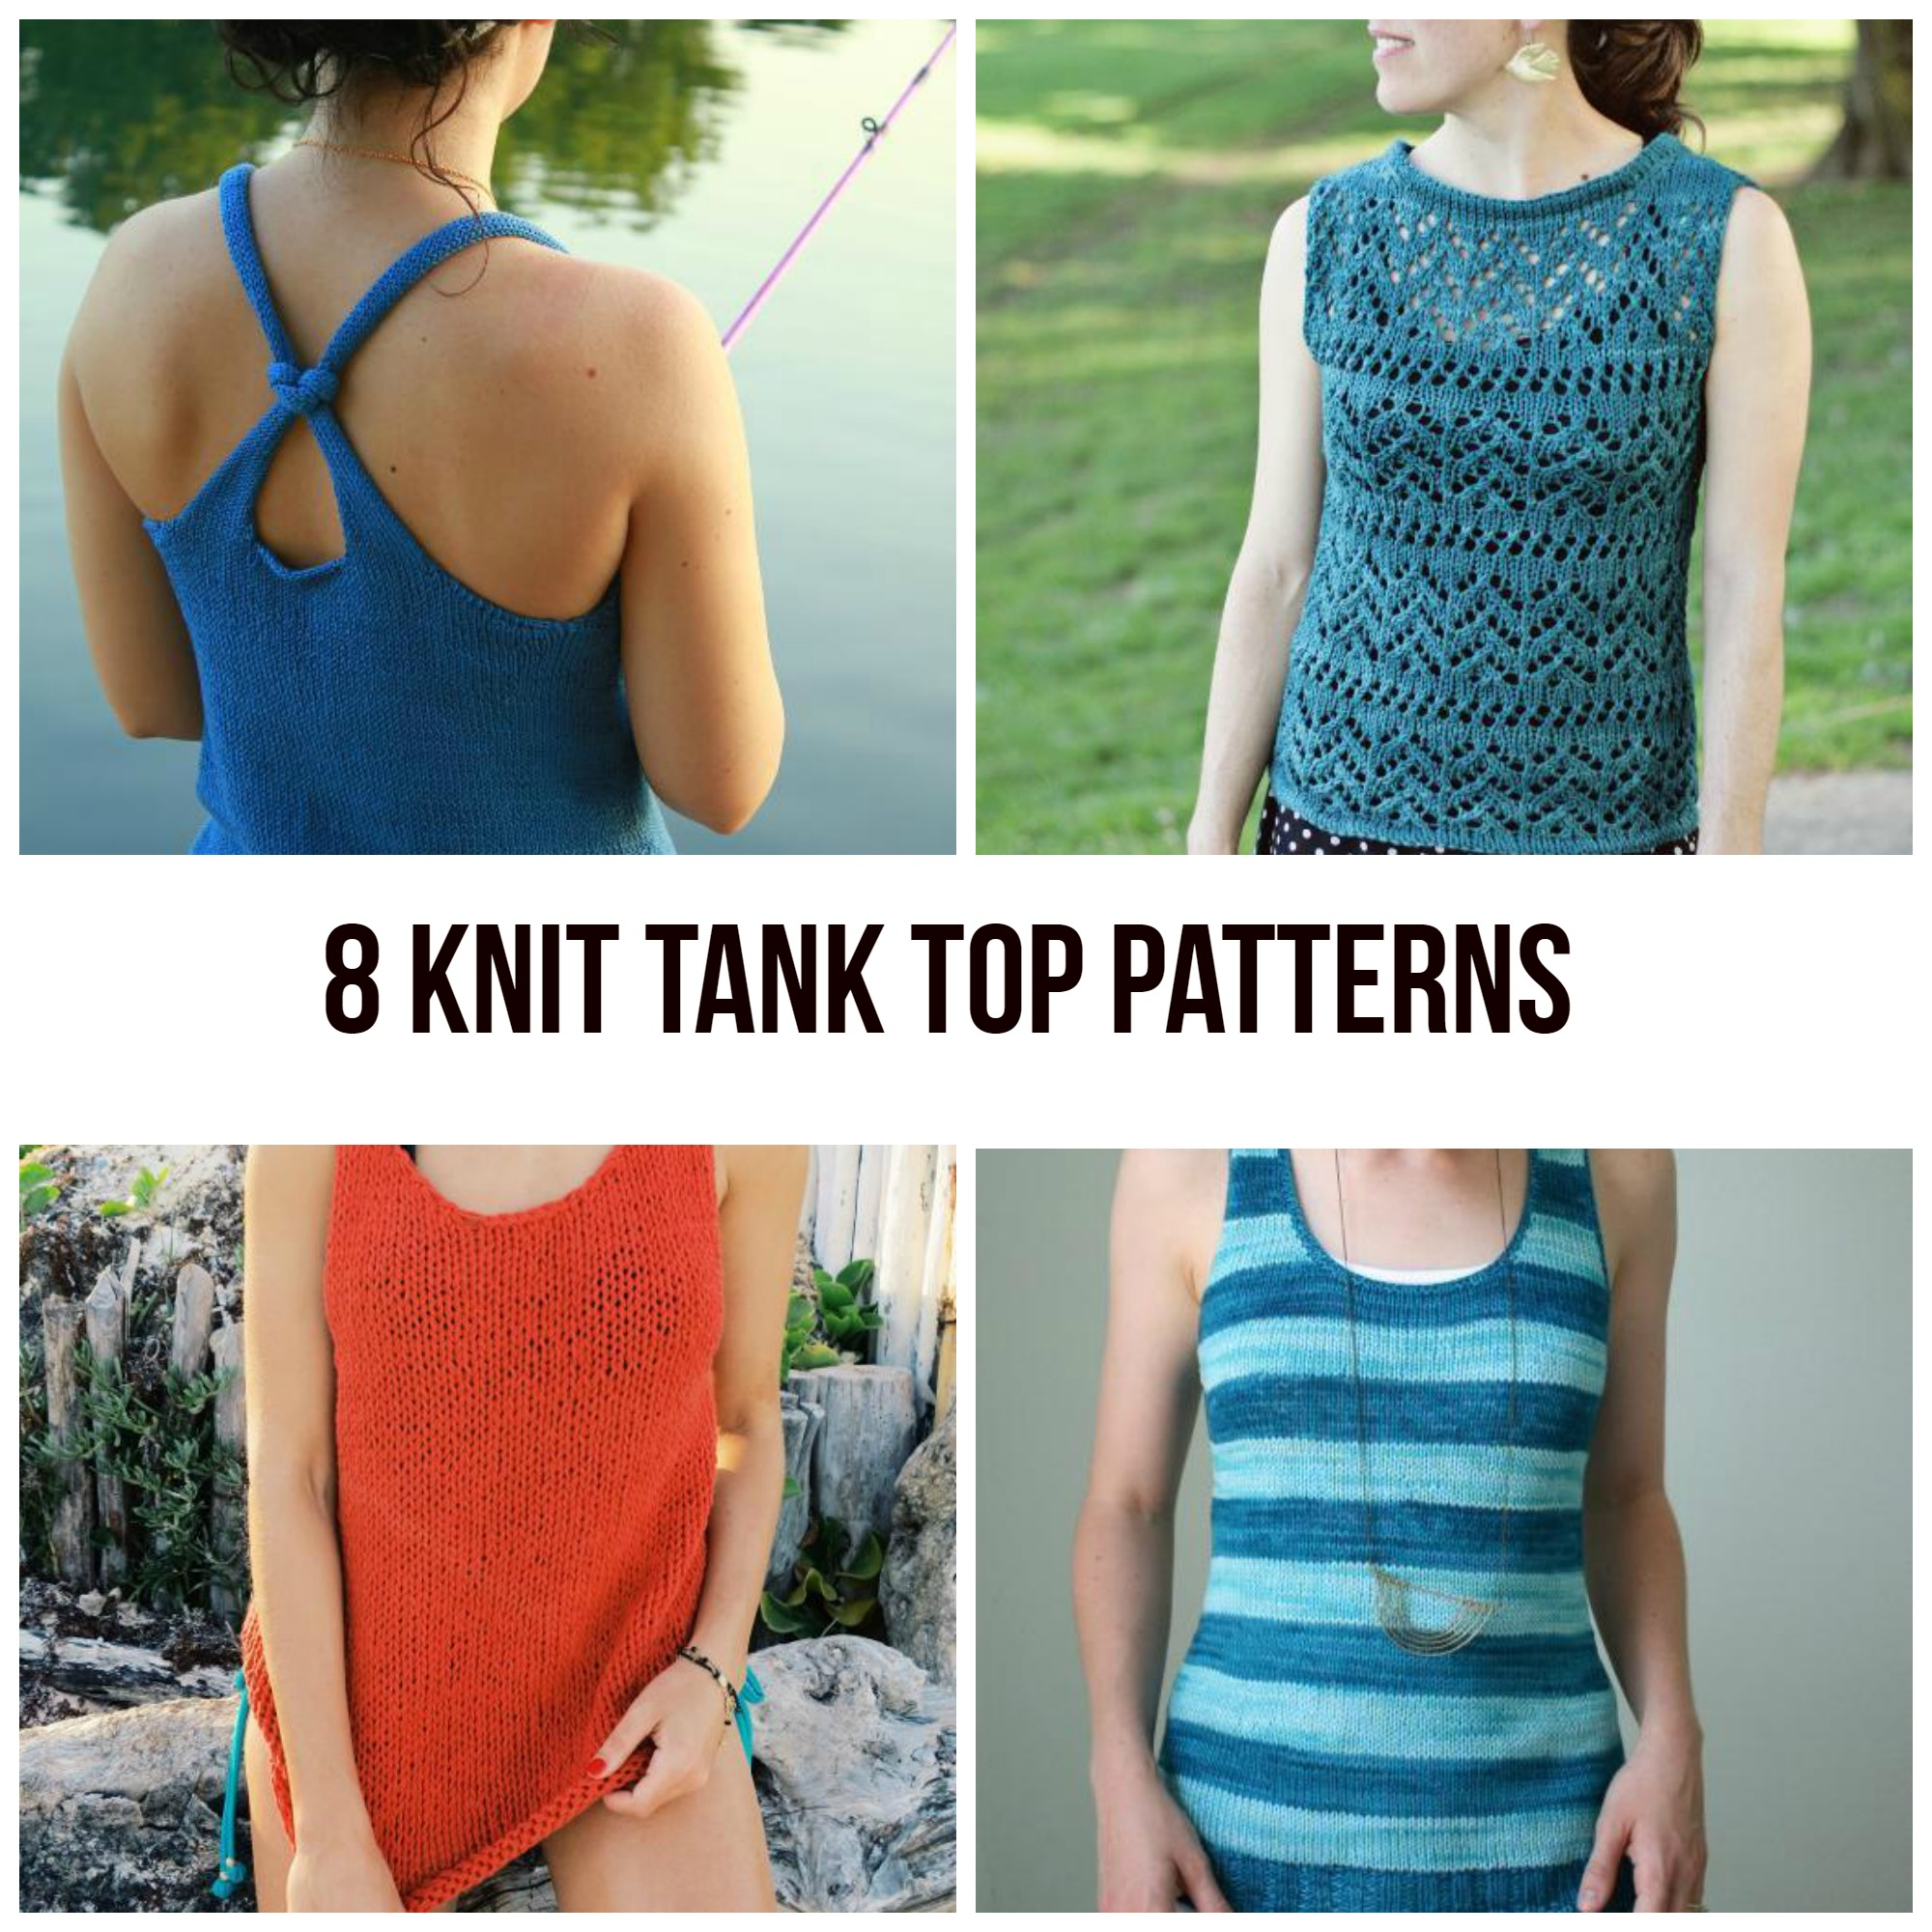 Knitted Tank Top Patterns Knit Tank Top Patterns For Summer